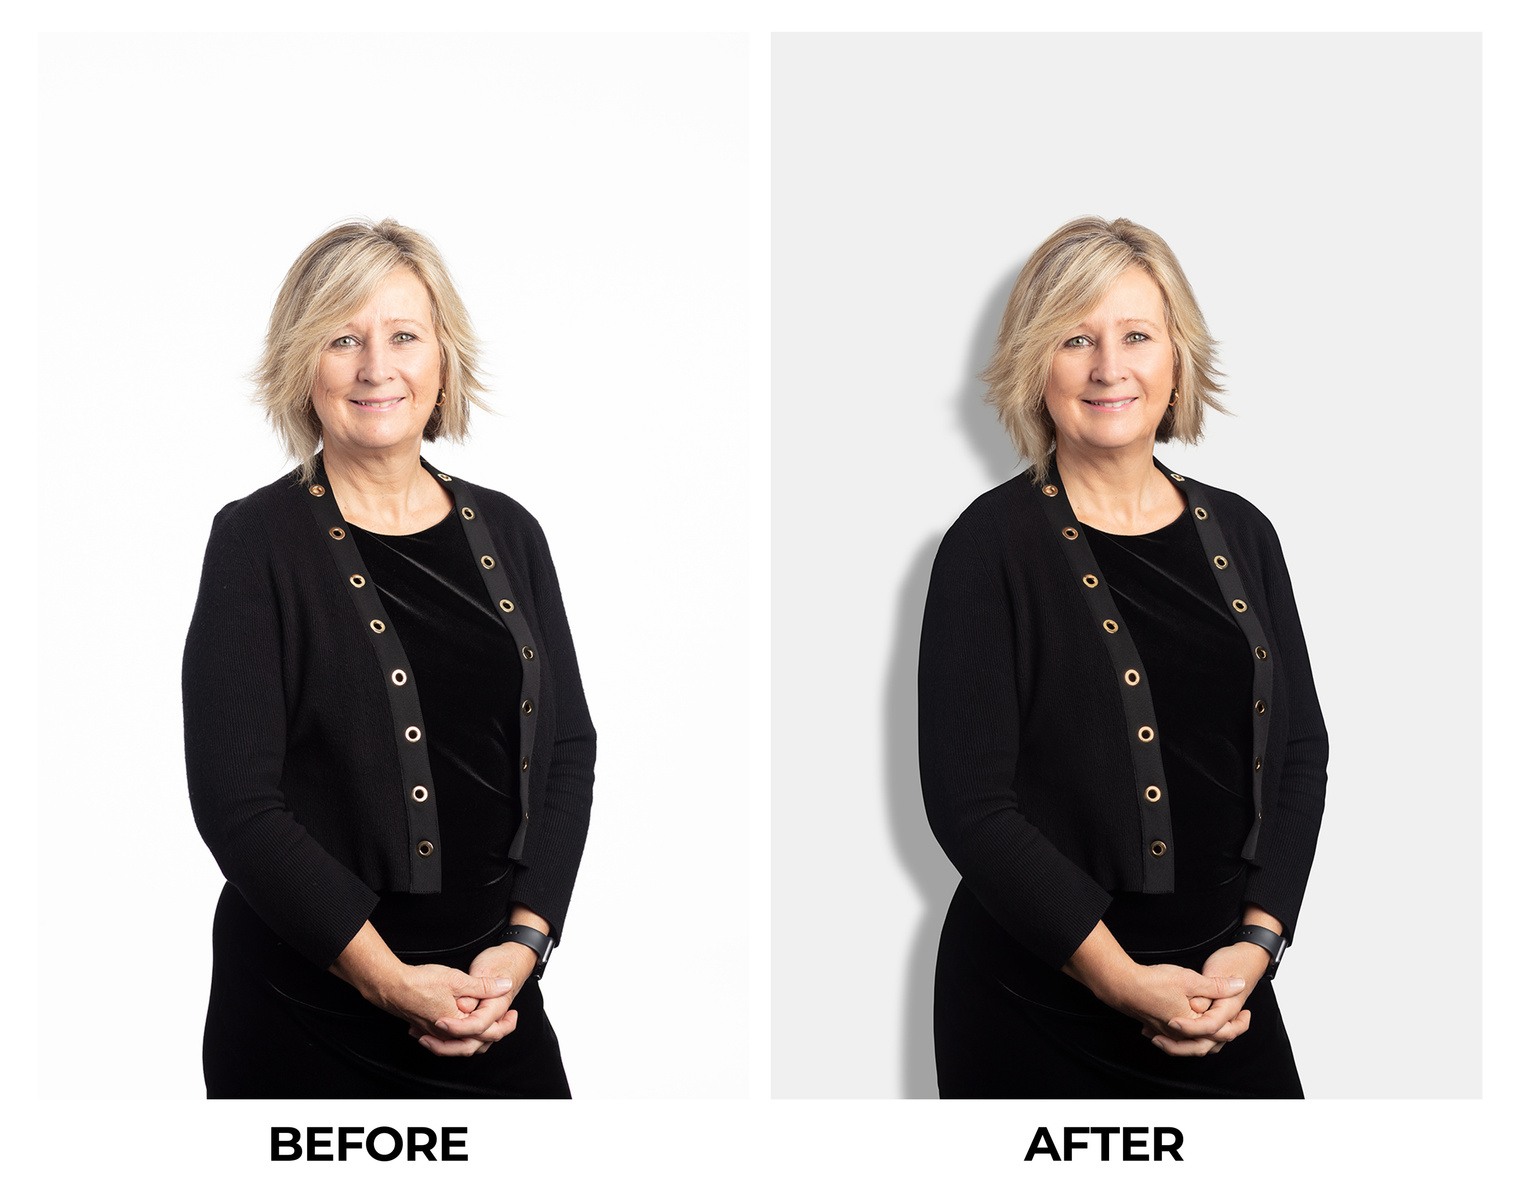 Photo cut out services in new york, california and the bay area. Clipping path, masking and portrait retouching services.